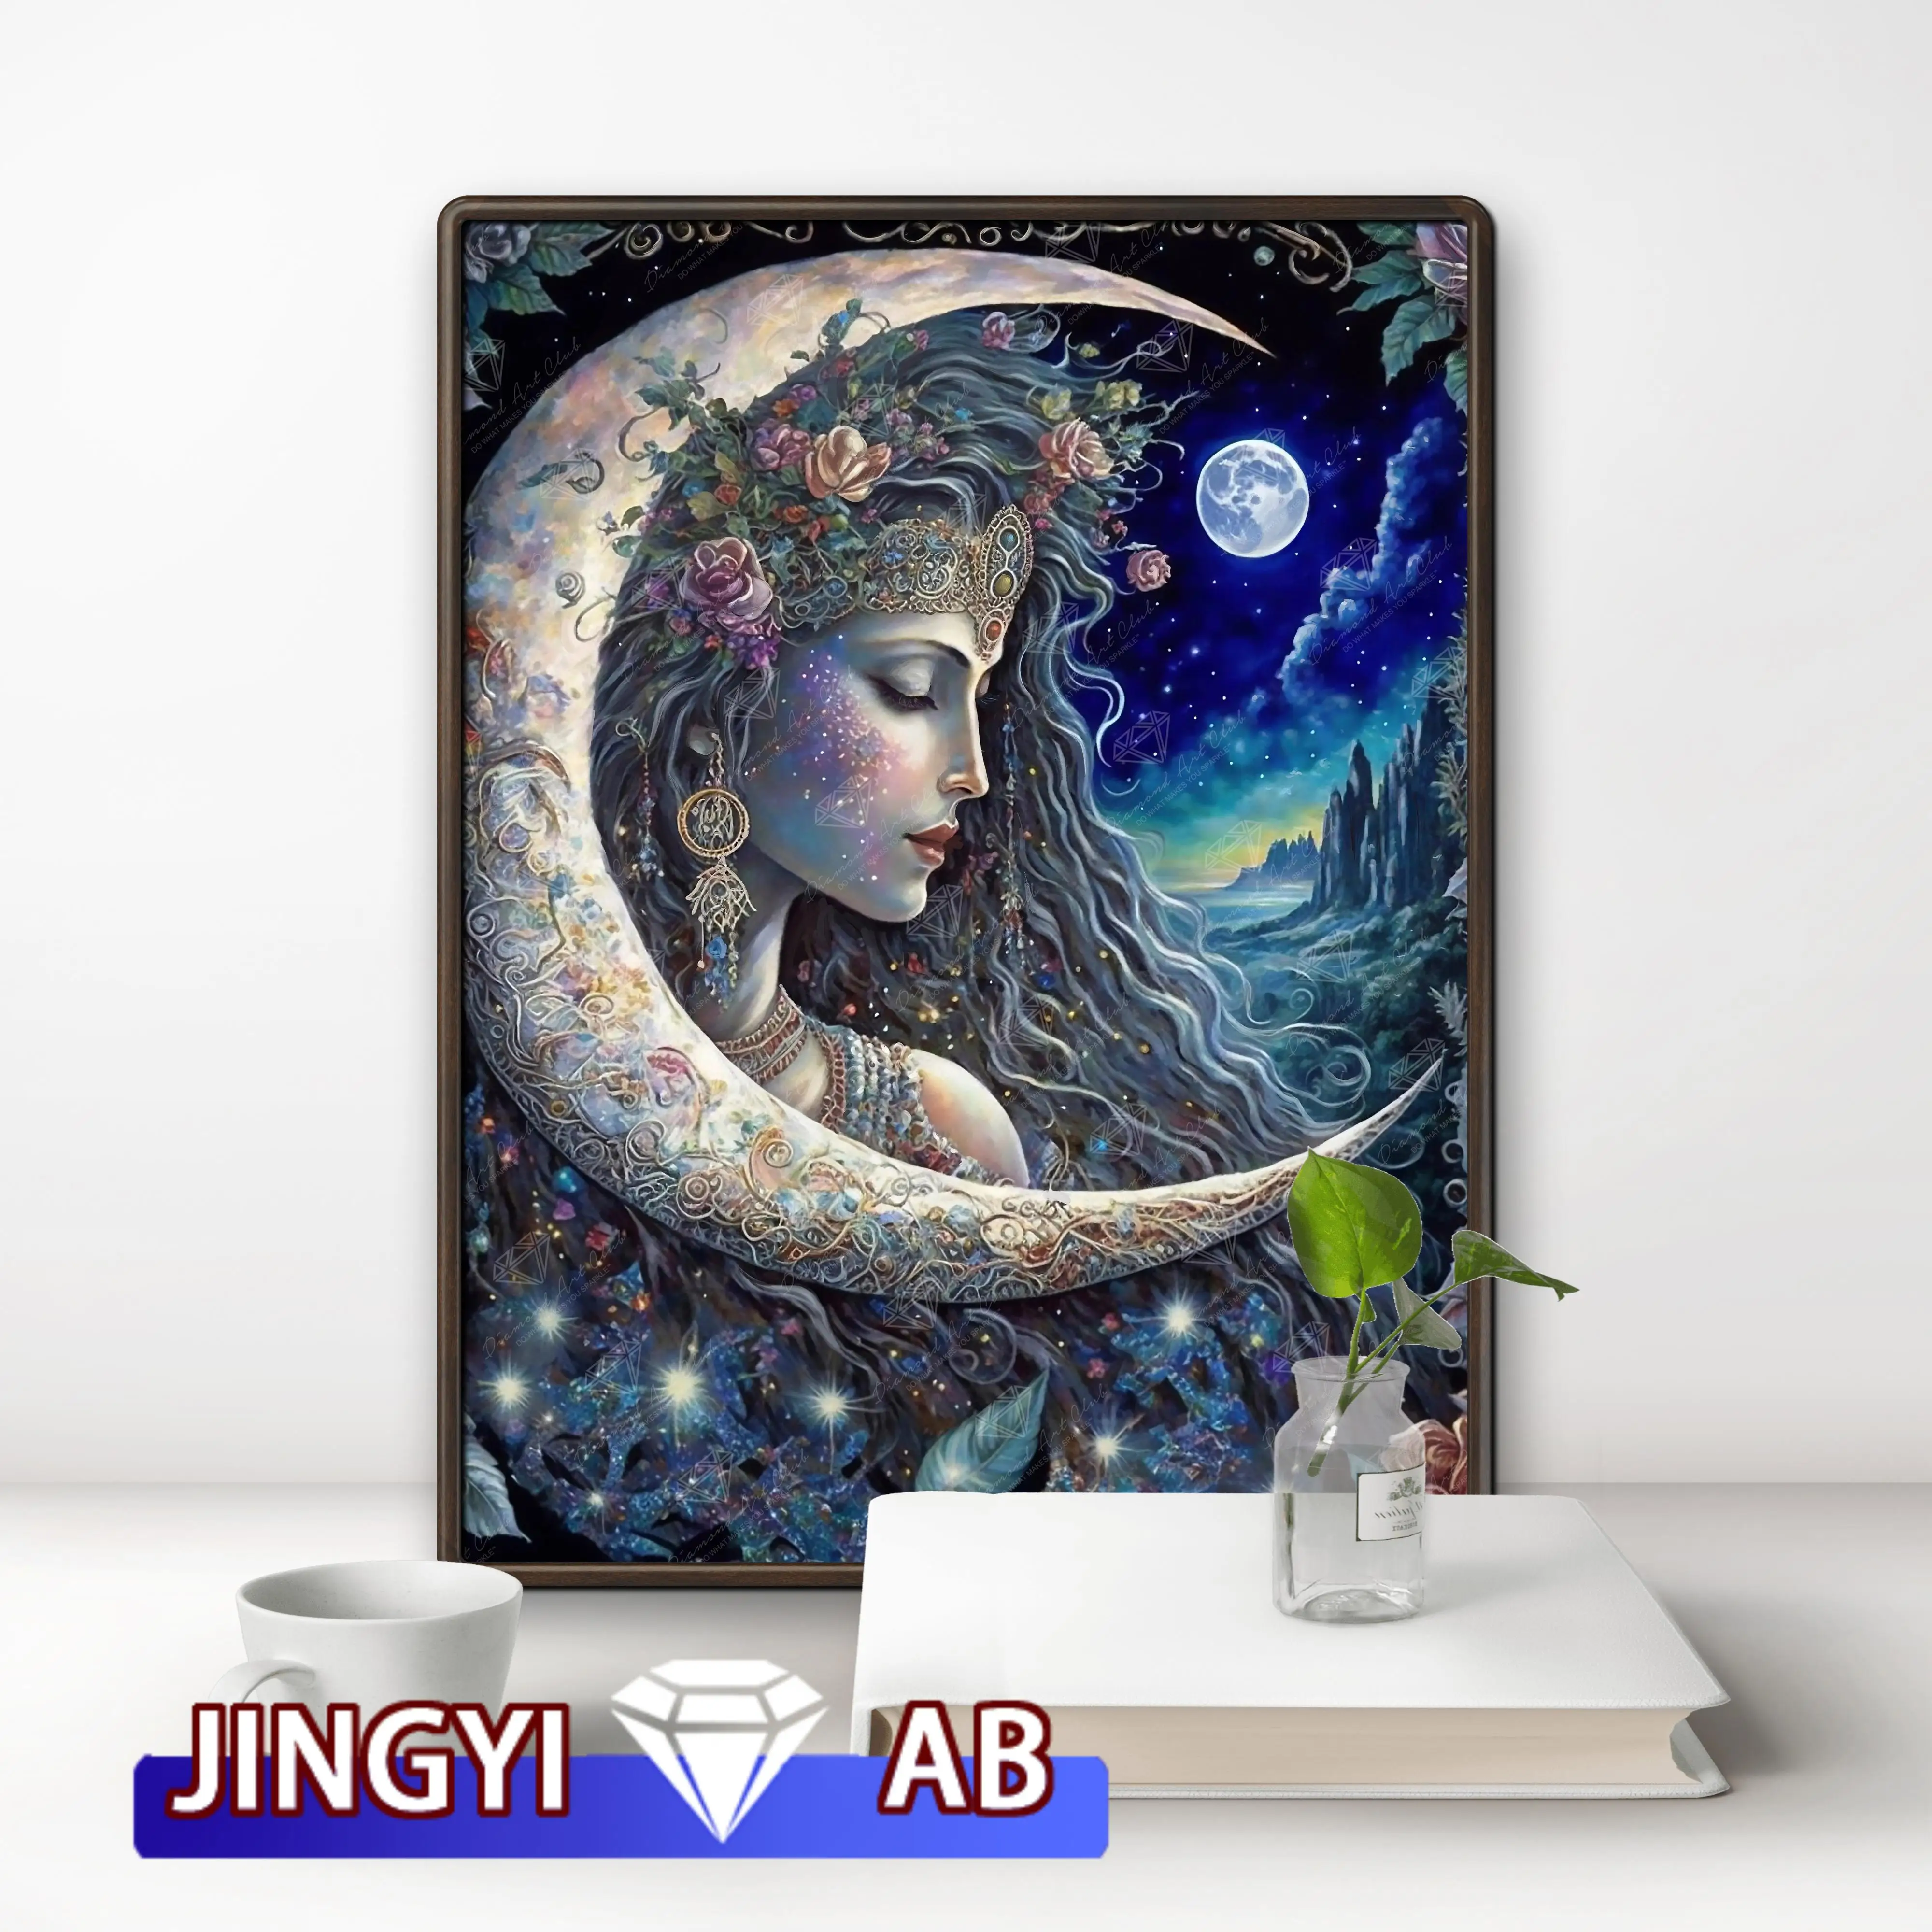 

Fantasy Moon Goddess 5D AB Diamond Painting Embroidery Woman Landscape Art Cross Stitch Mosaic Pictures Handmade Home Decor Gift